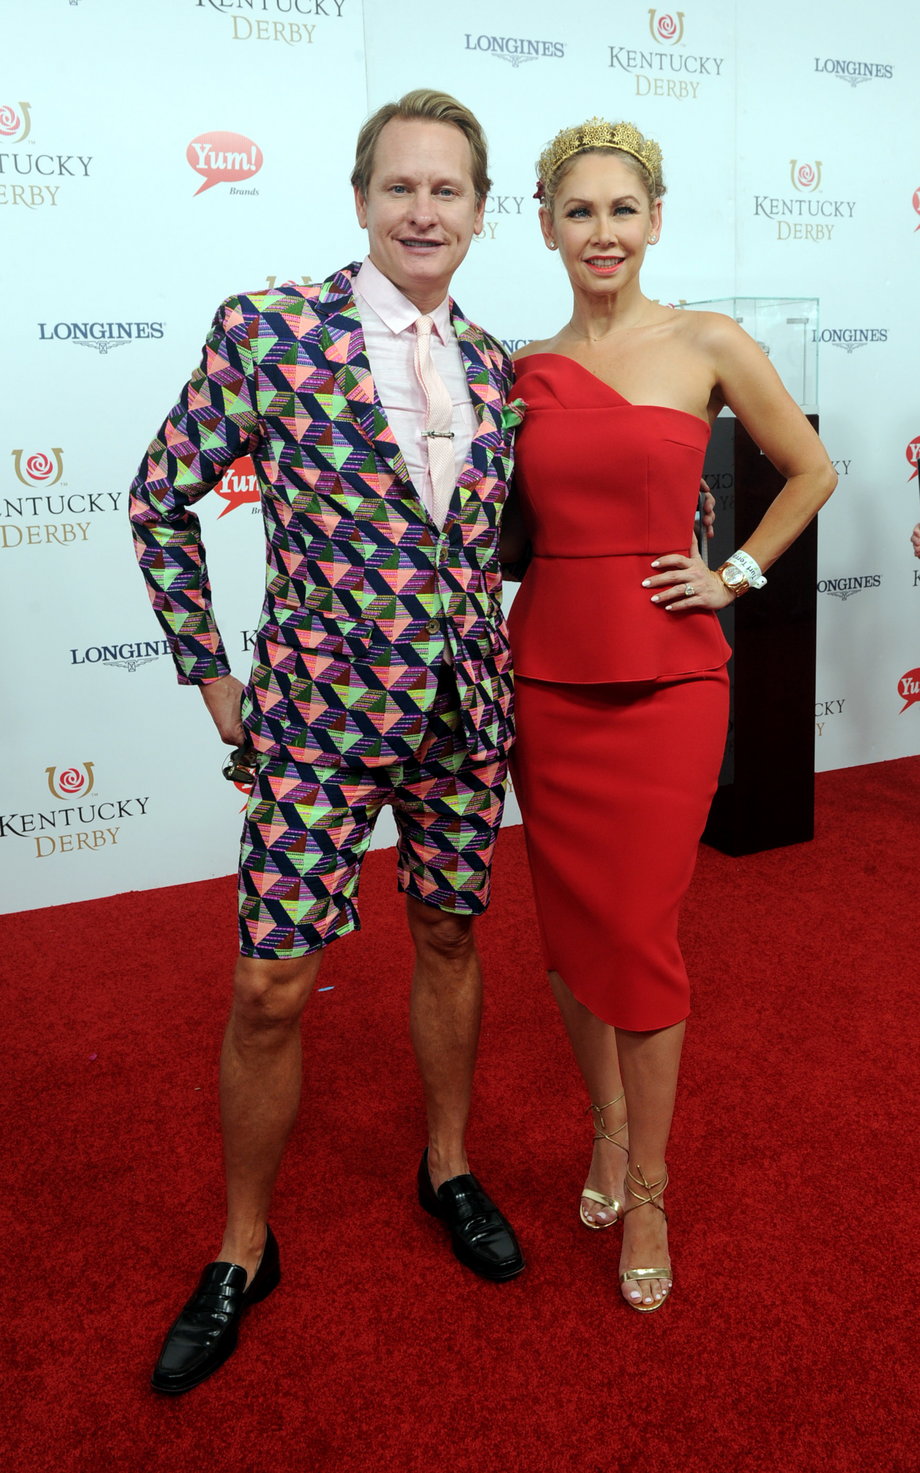 WORST: Celebrity stylist Carson Kressley went with too much pattern in this shorts suit.